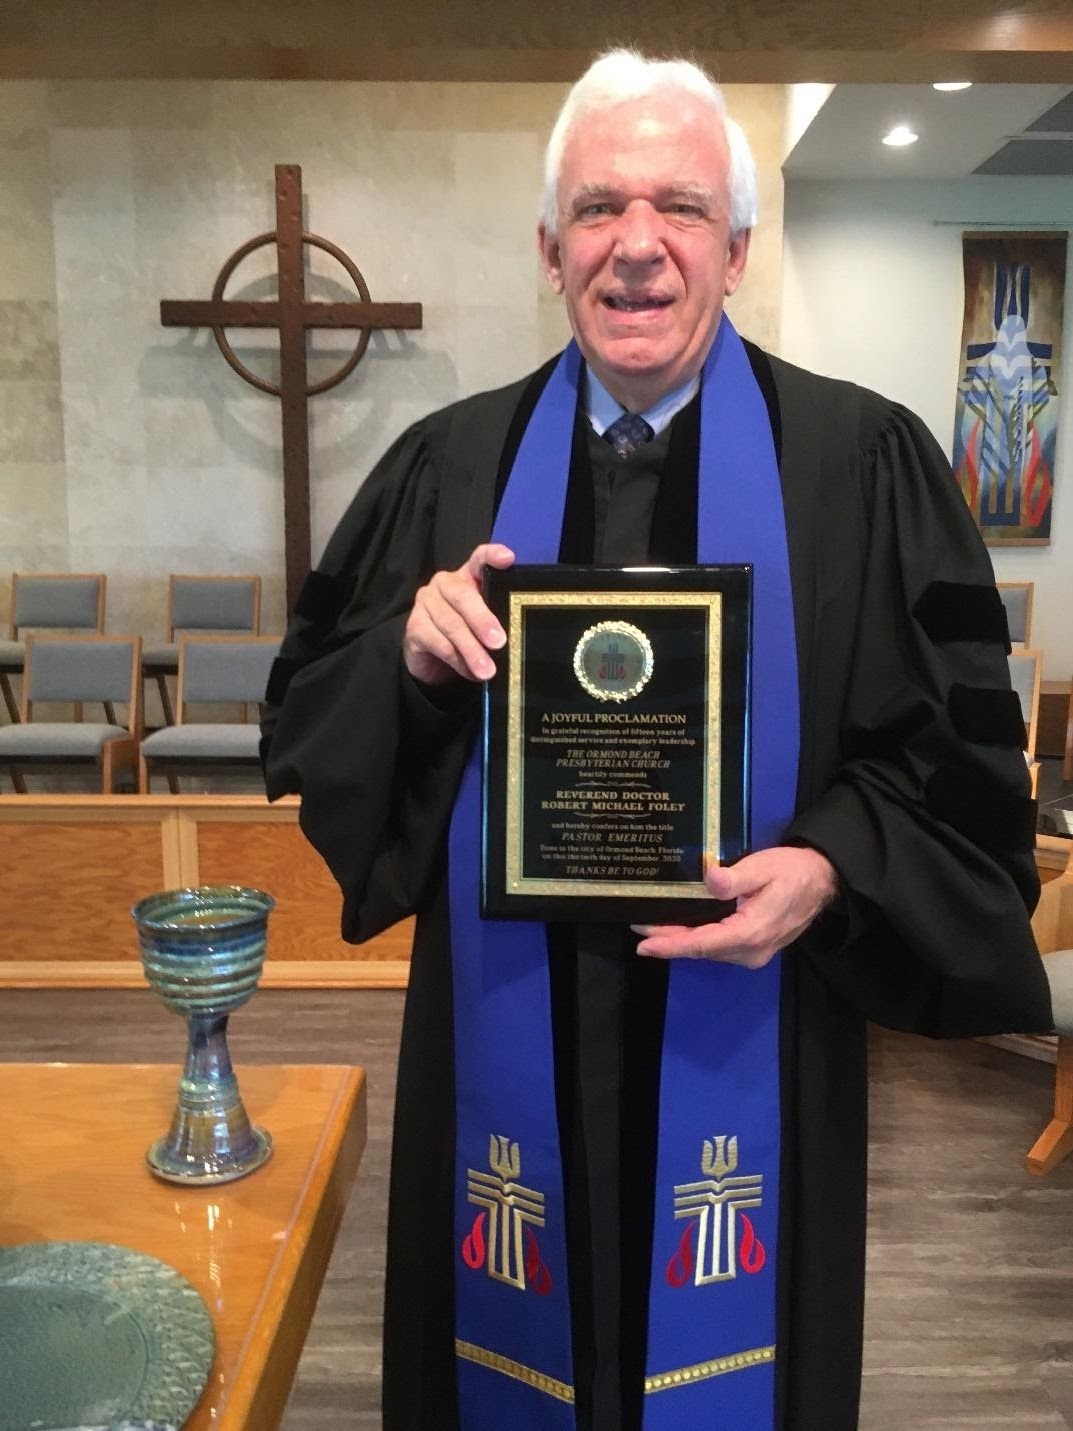 Rev. Dr. R. Michael Foley was bestowed the honorary title of Pastor Emeritus by the congregation during a special presentation on Sept. 13. Courtesy photo